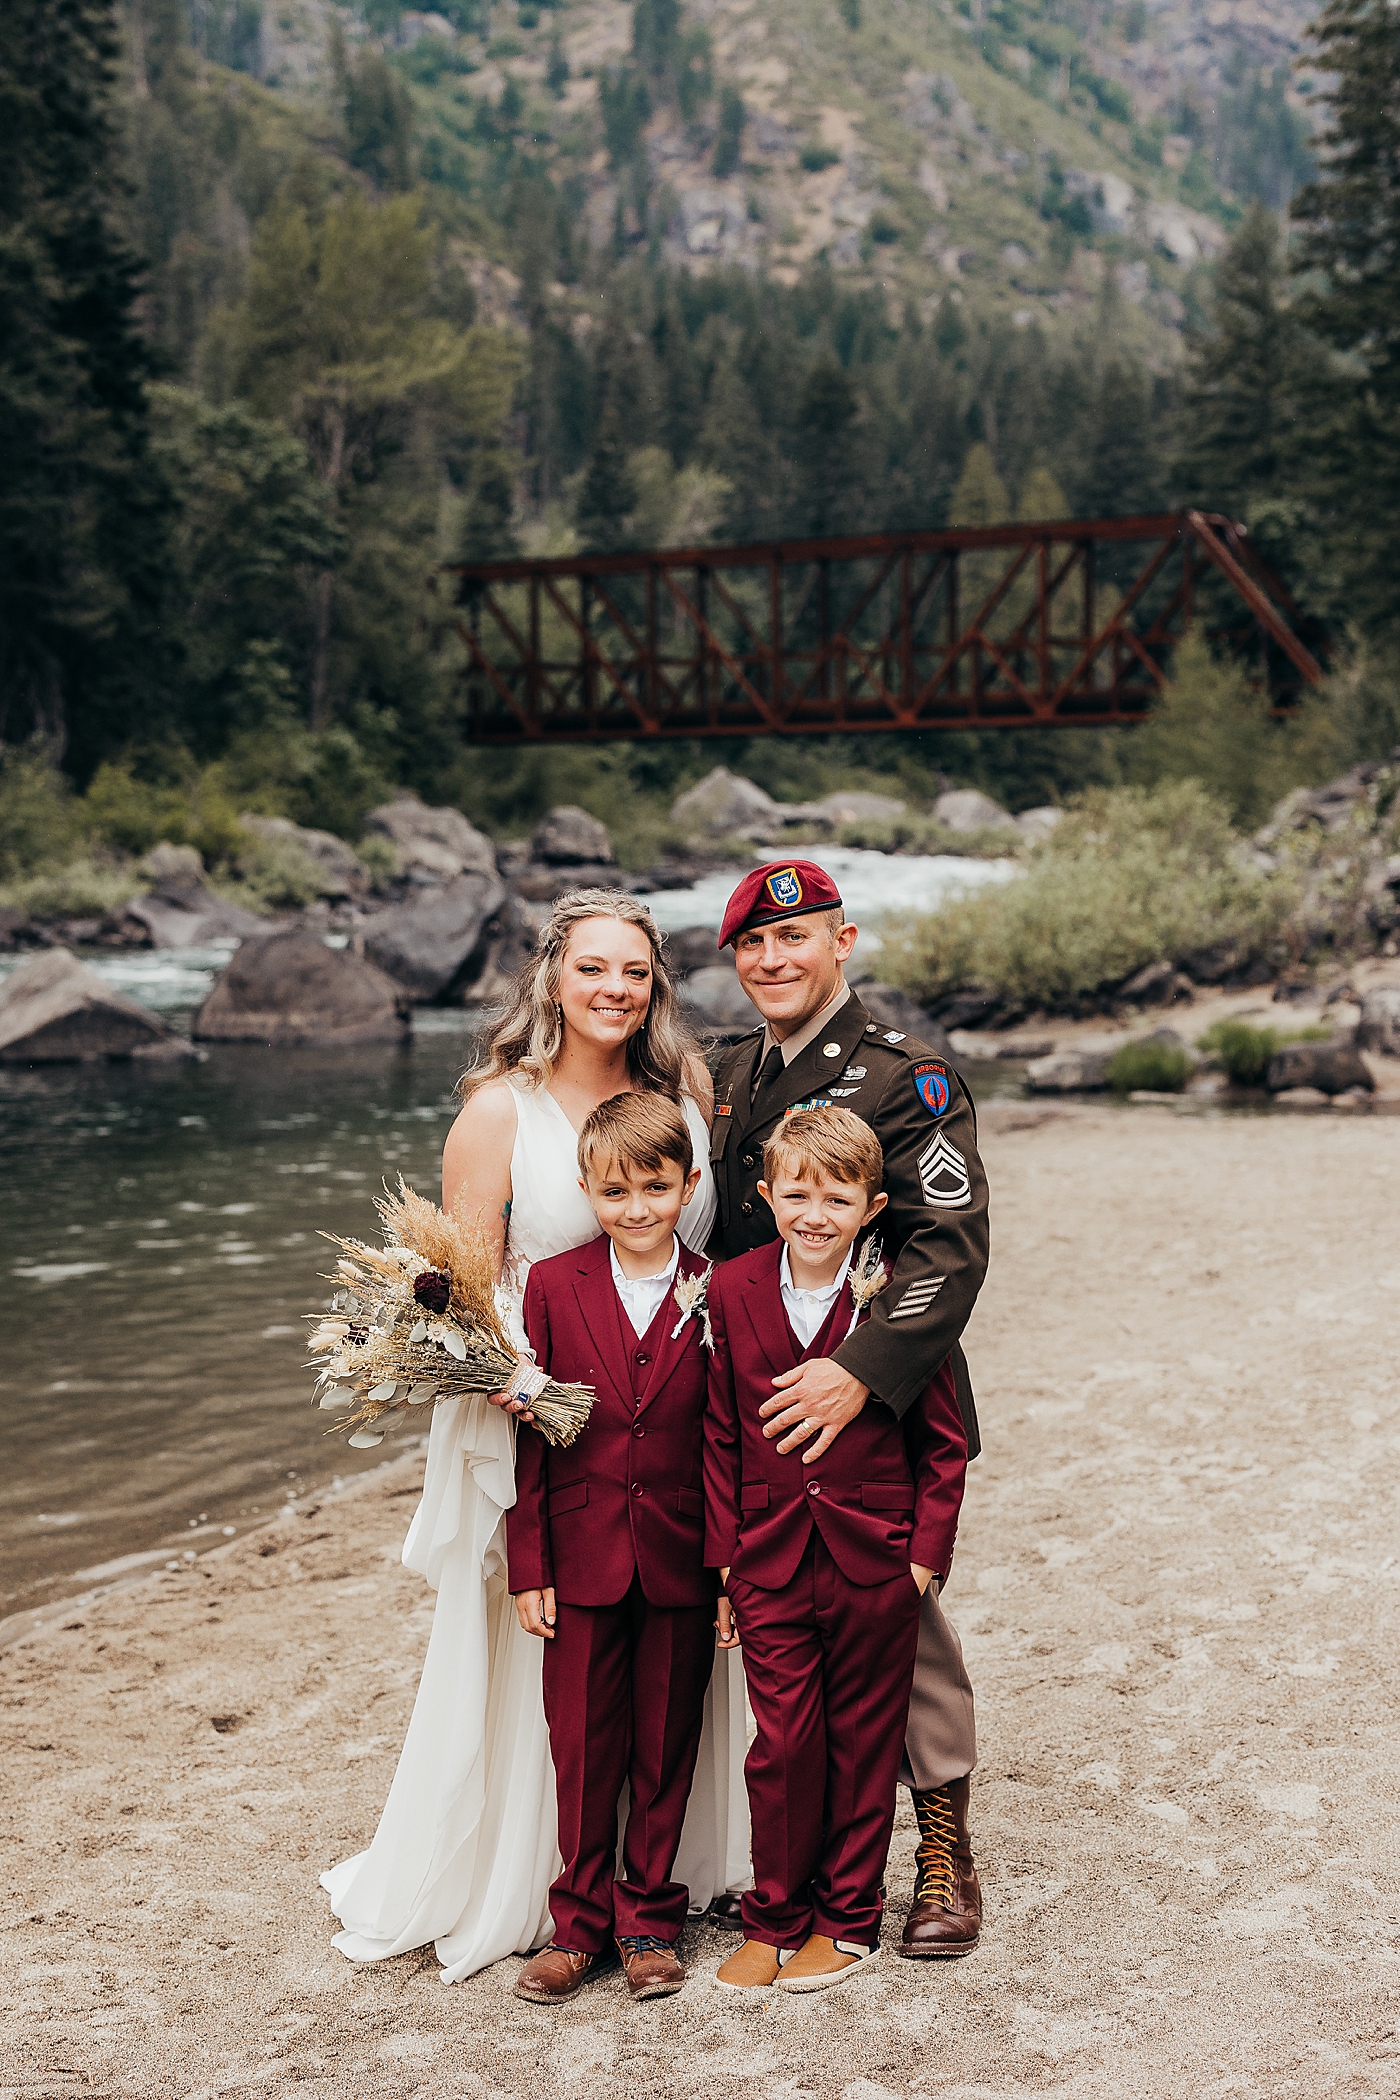 Newly married couple with their two boys. Photo by Megan Montalvo Photography.